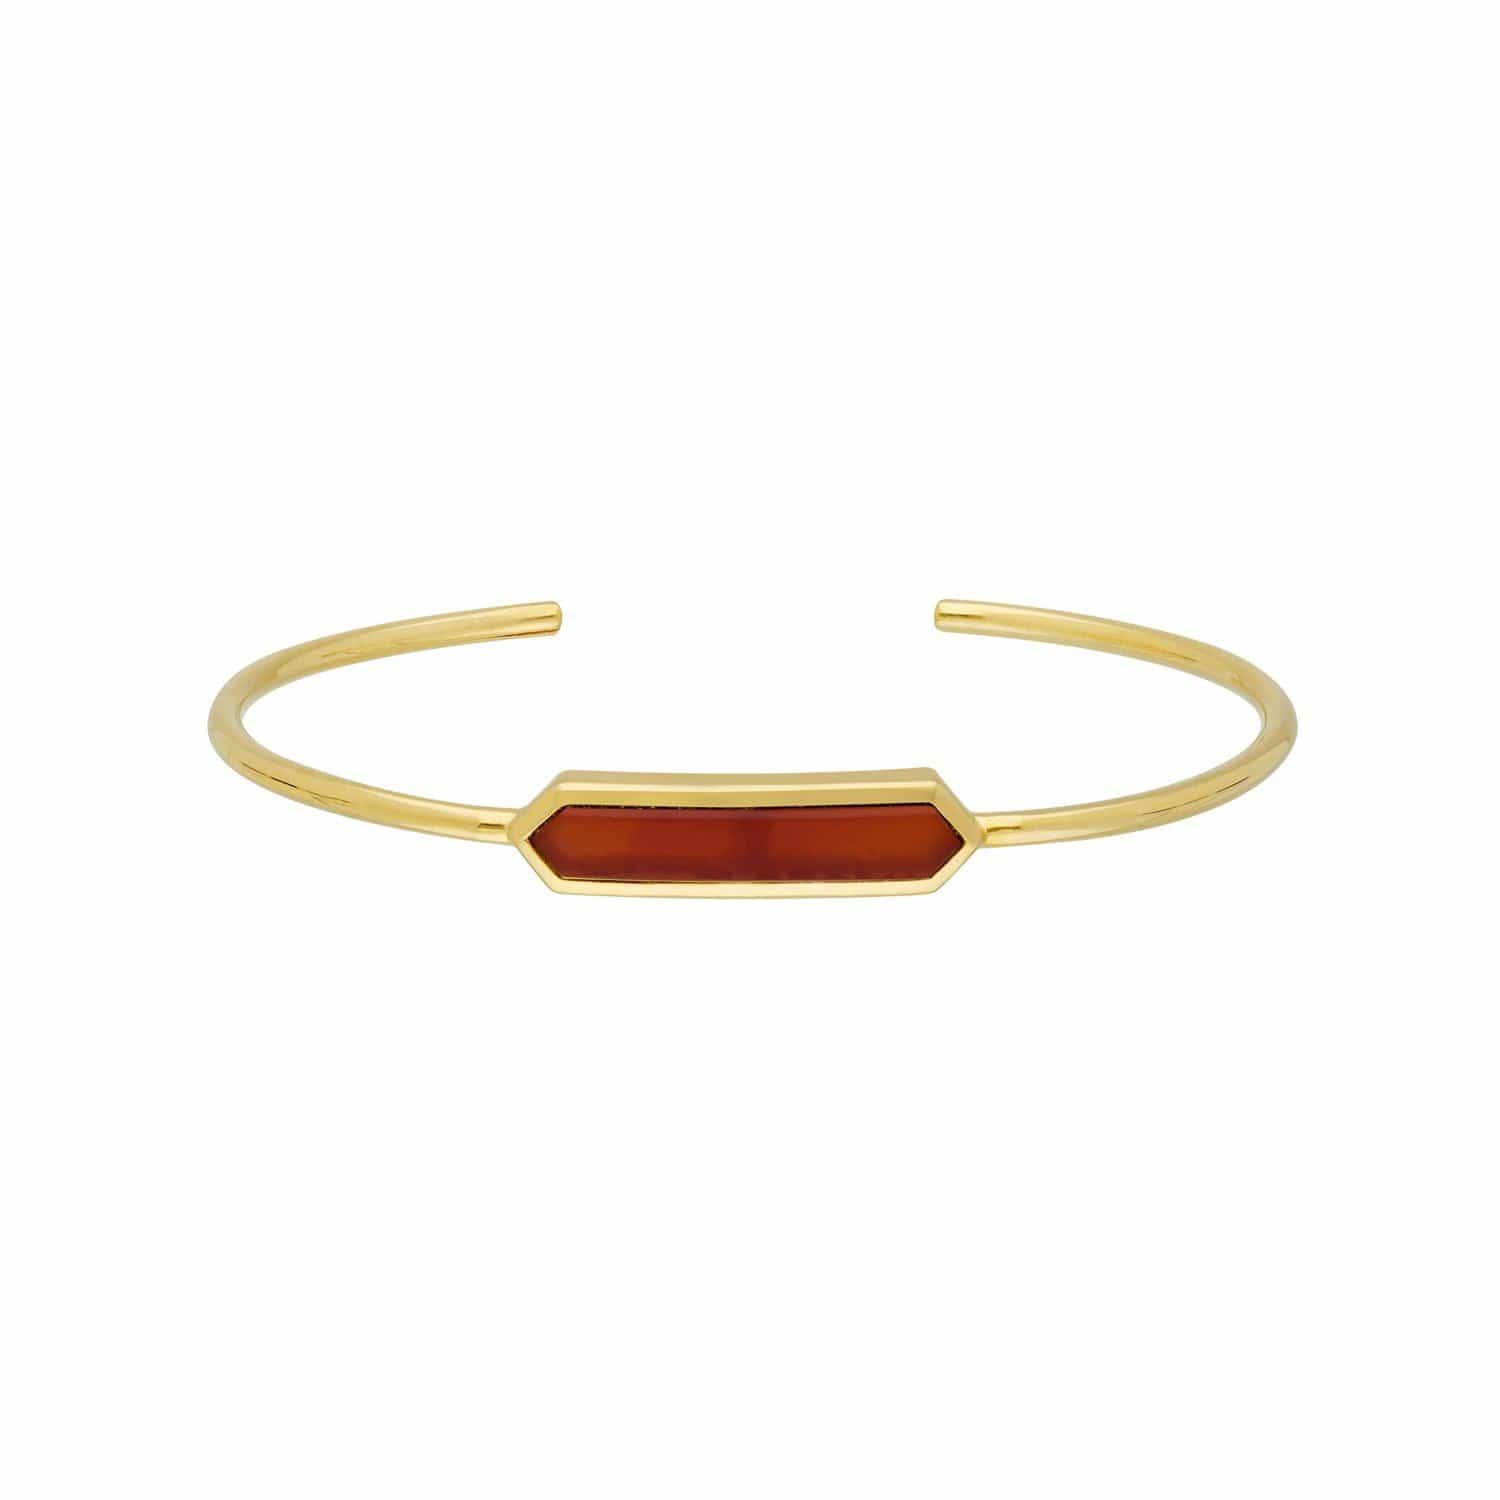 Geometric Prism Dyed Red Carnelian Bangle in Gold Plated Sterling Silver